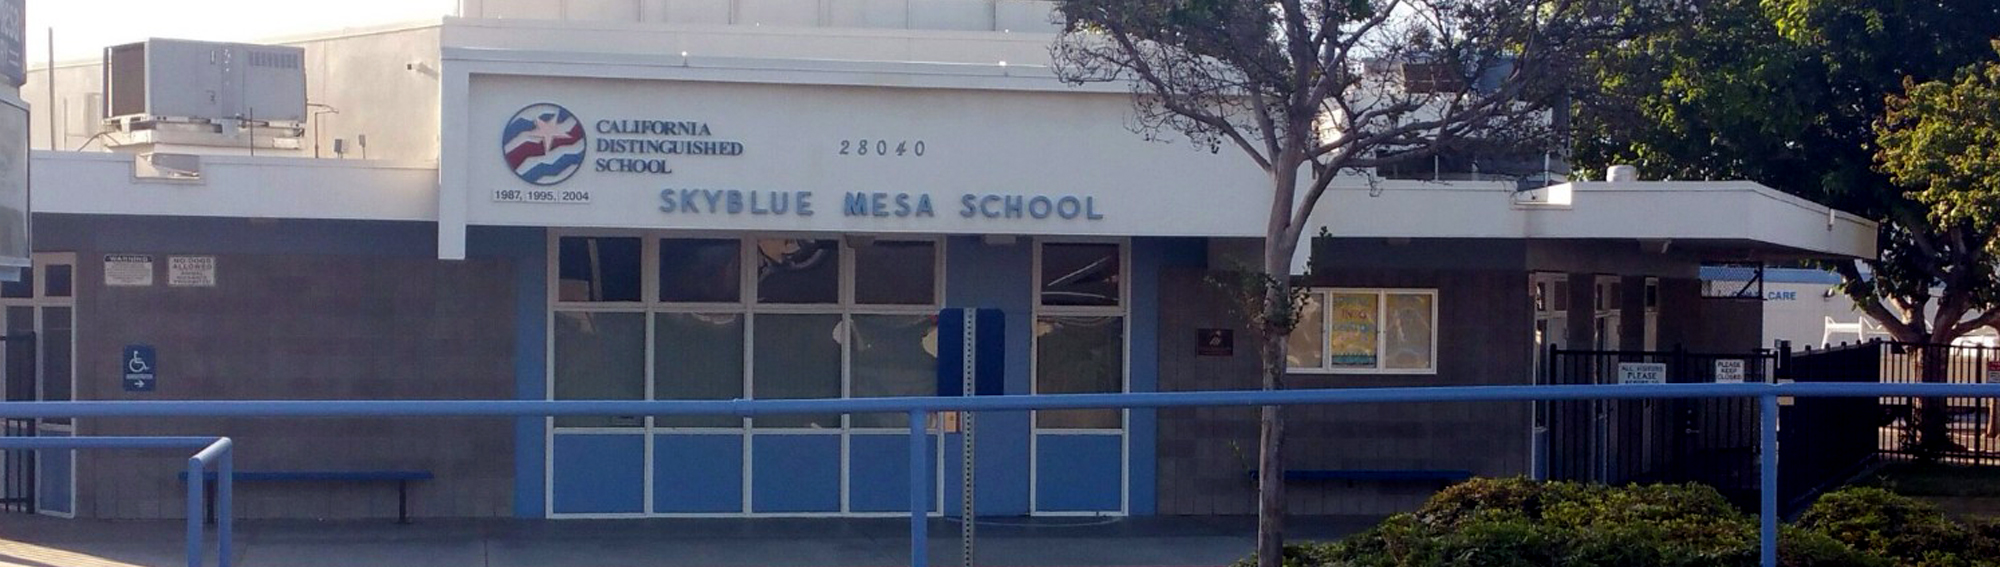 front view of SkyBlue Mesa School building